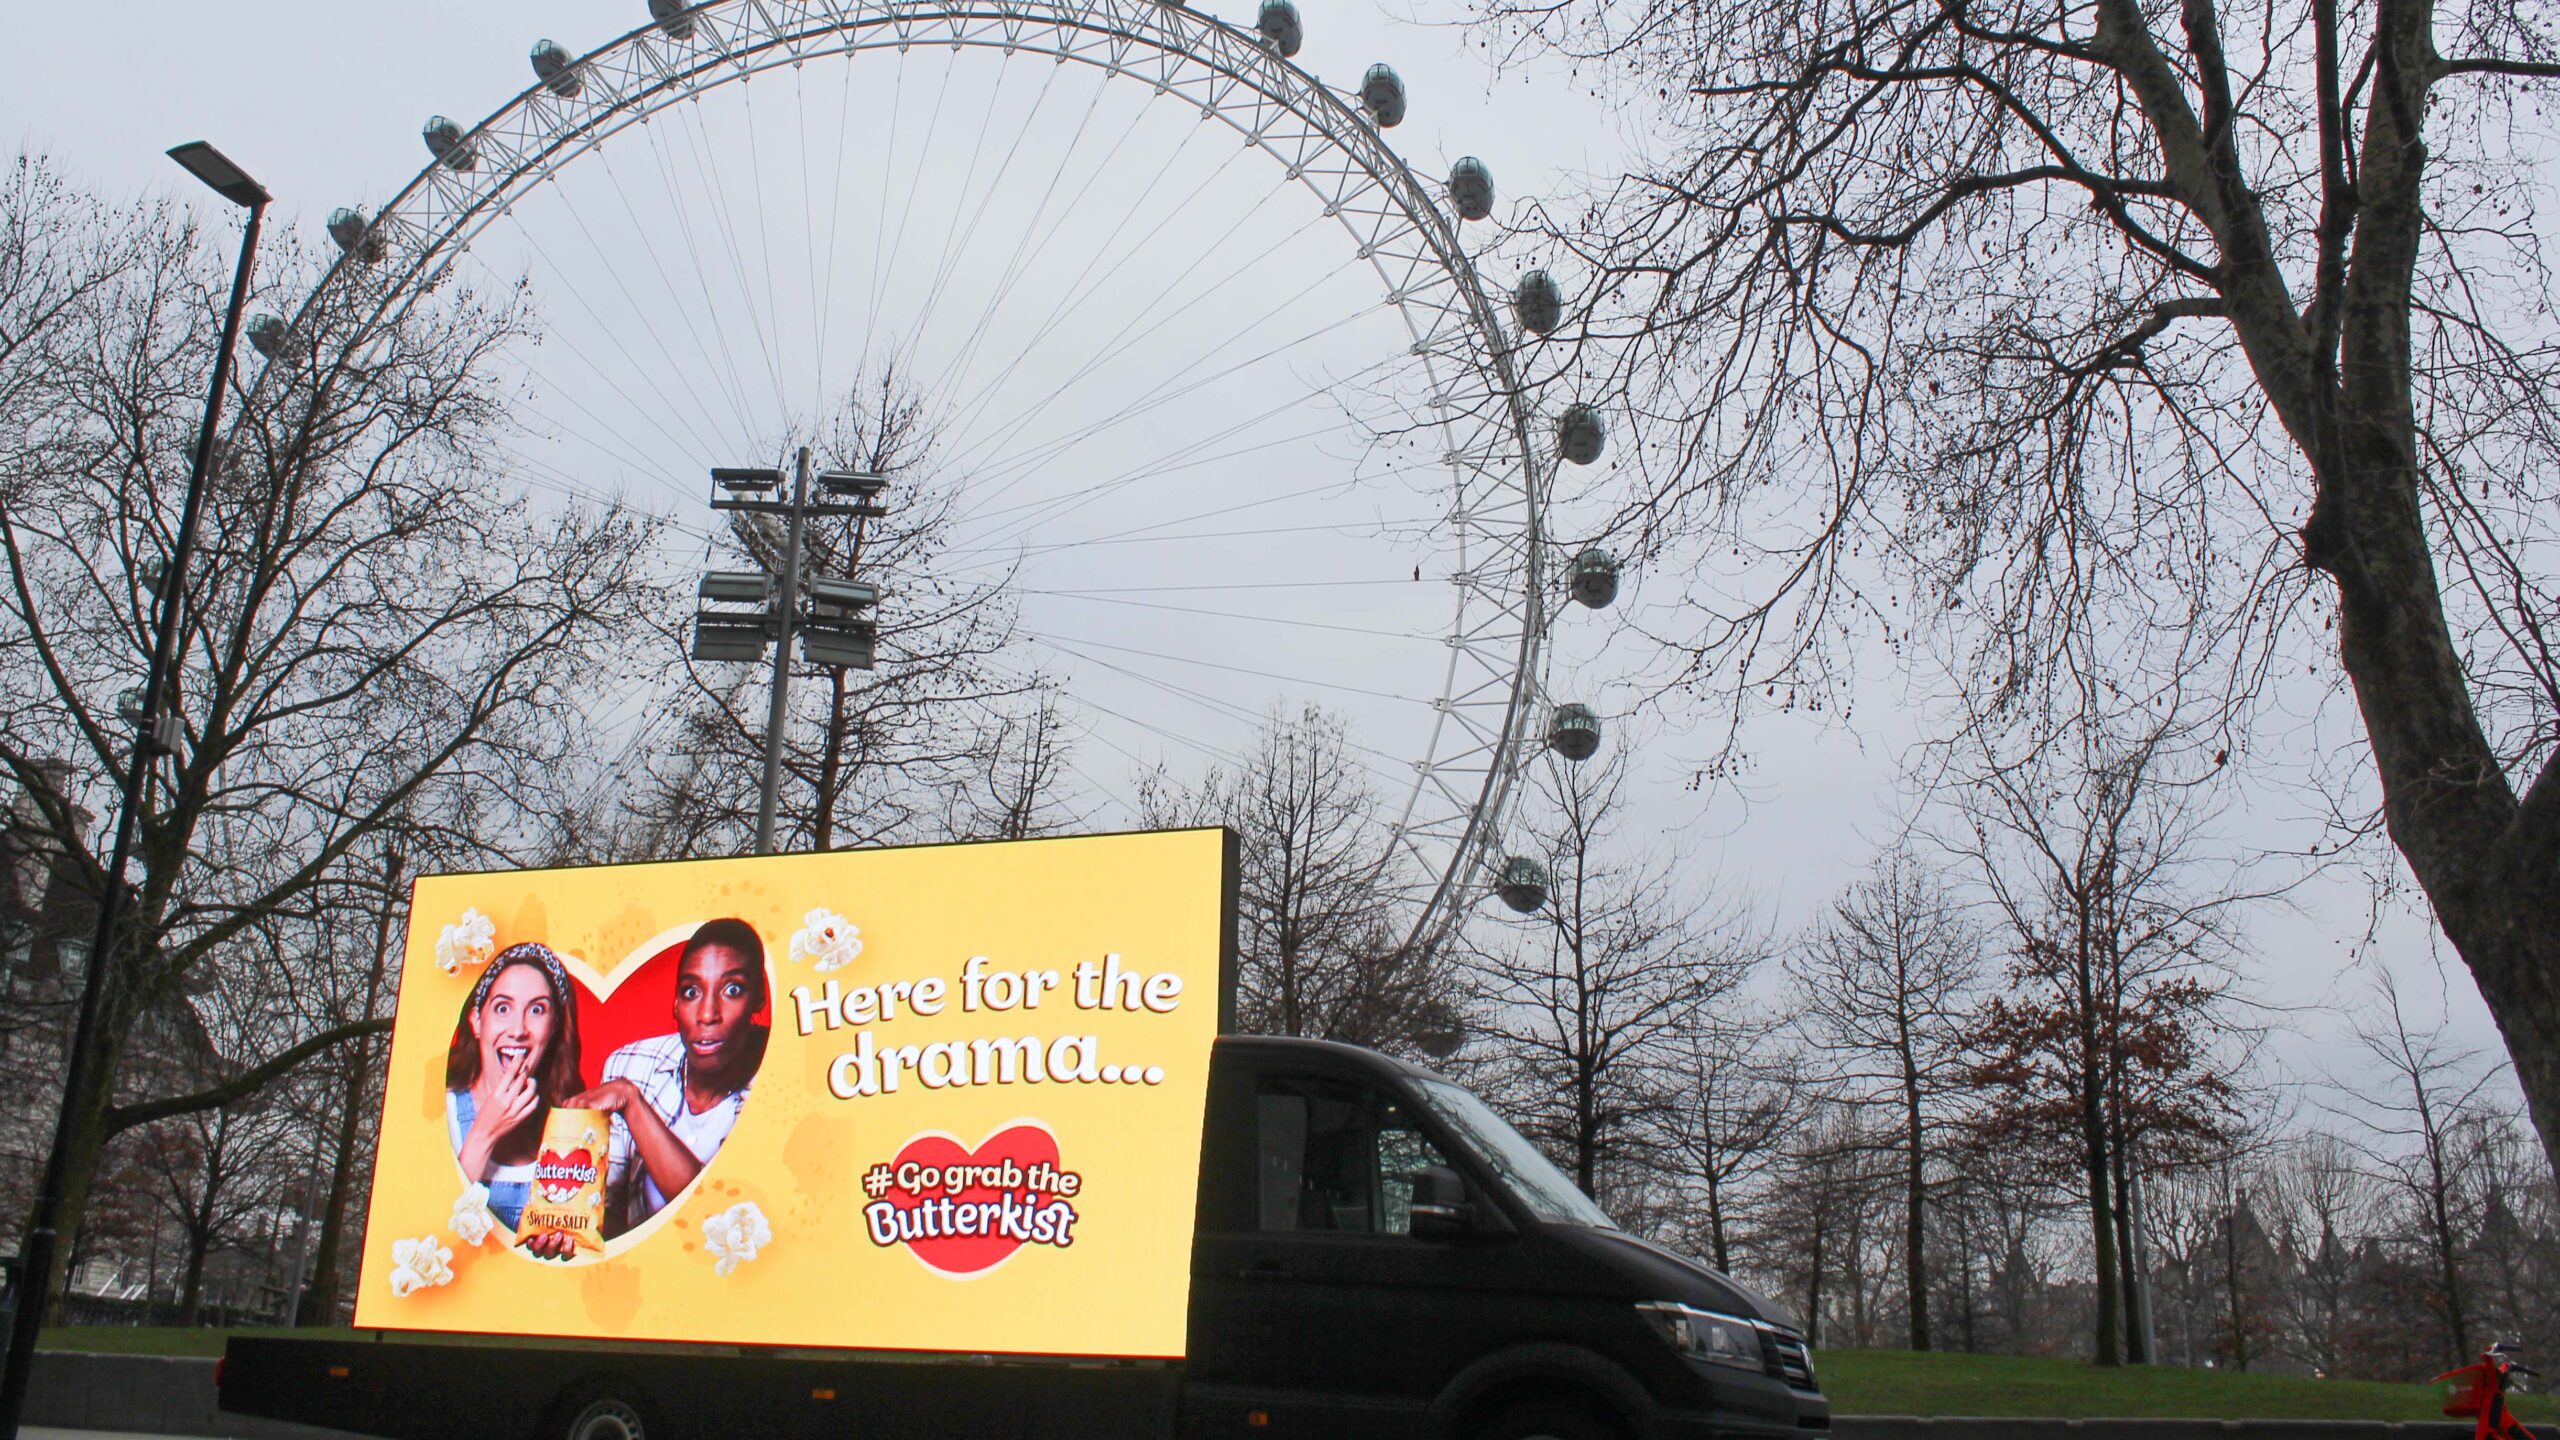 Butterkist Digivan with London Eye in the background